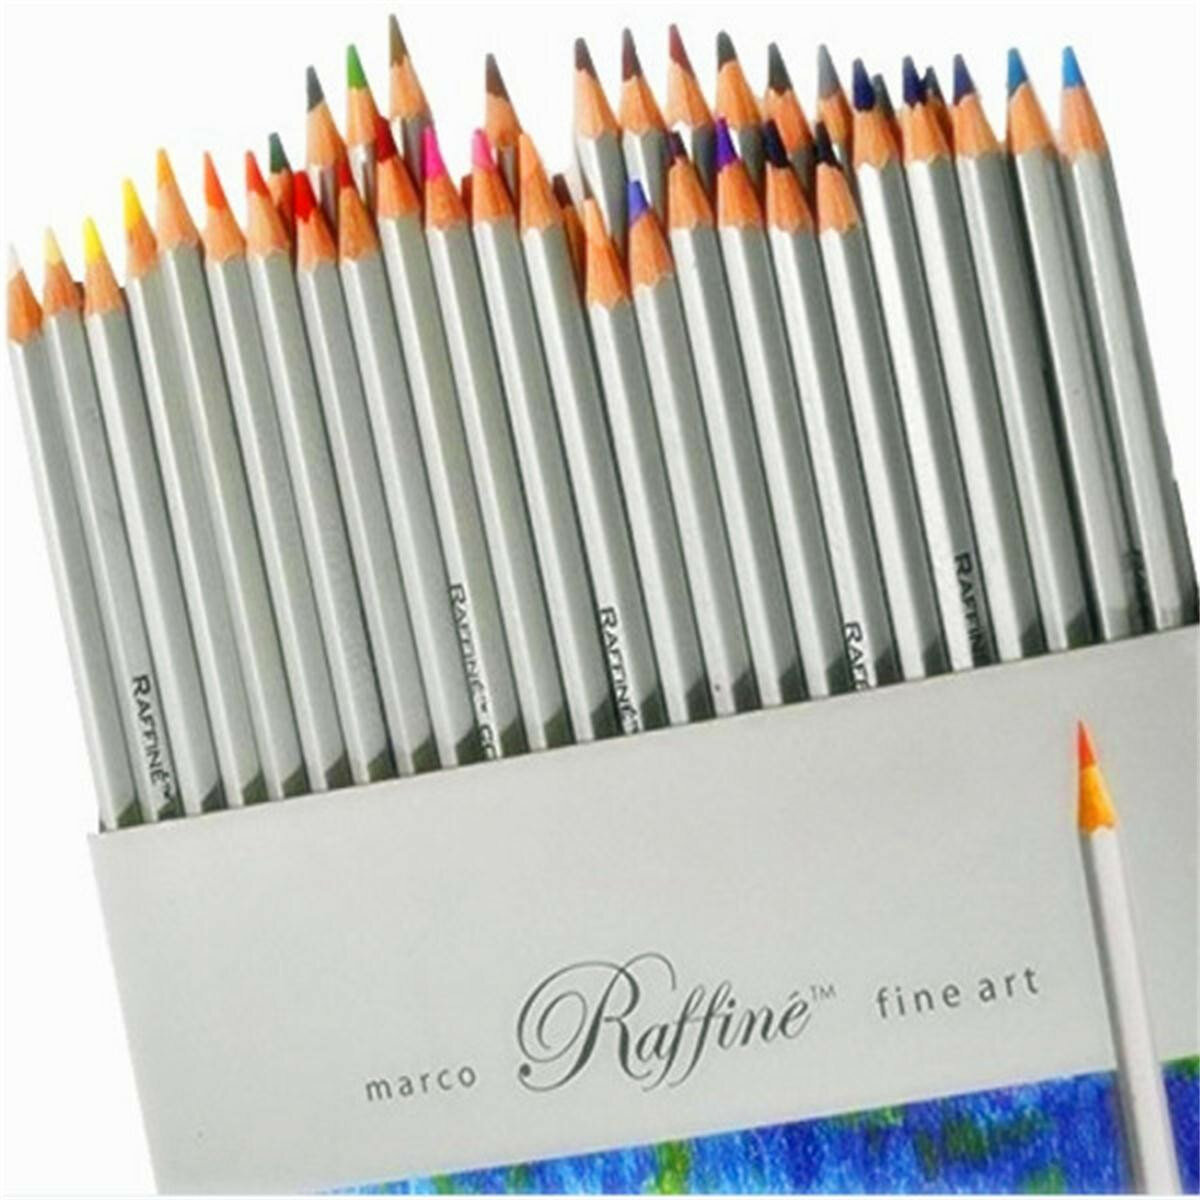 72 Colors Art Drawing Pencil Set Oil Non-toxic Pencils Painting Sketching Drawing Stationery School 